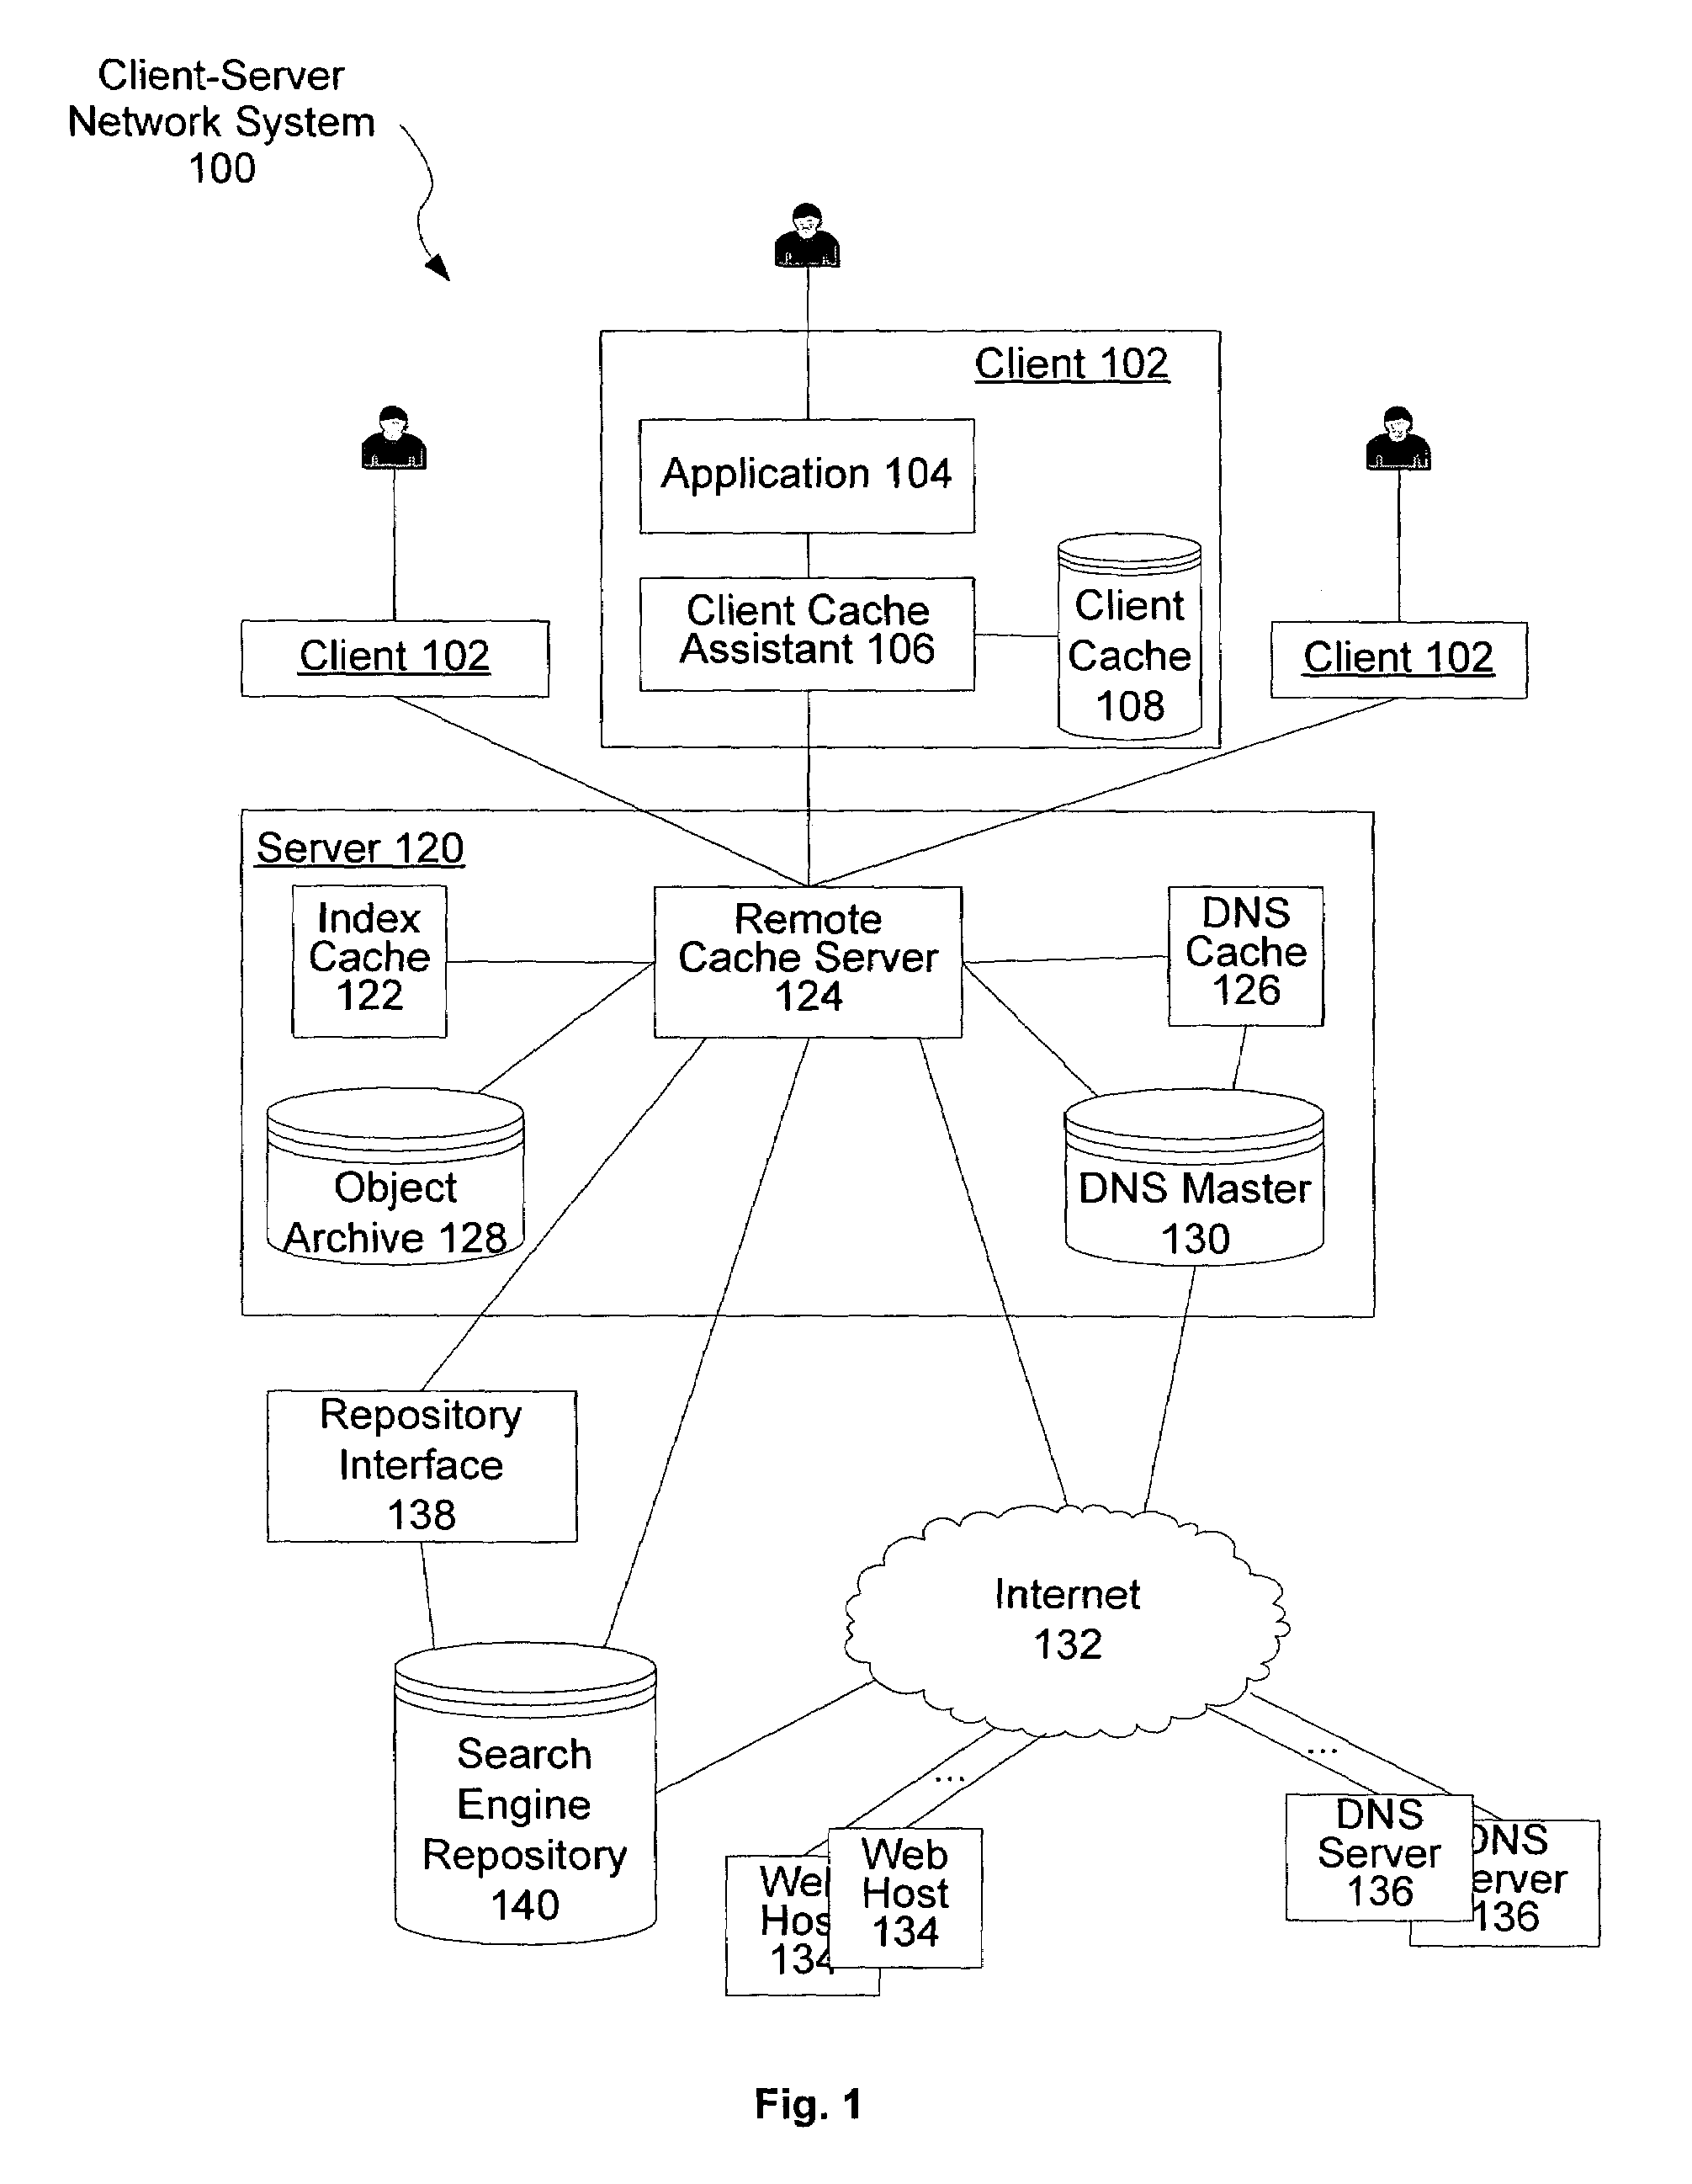 System and method of accessing a document efficiently through multi-tier web caching